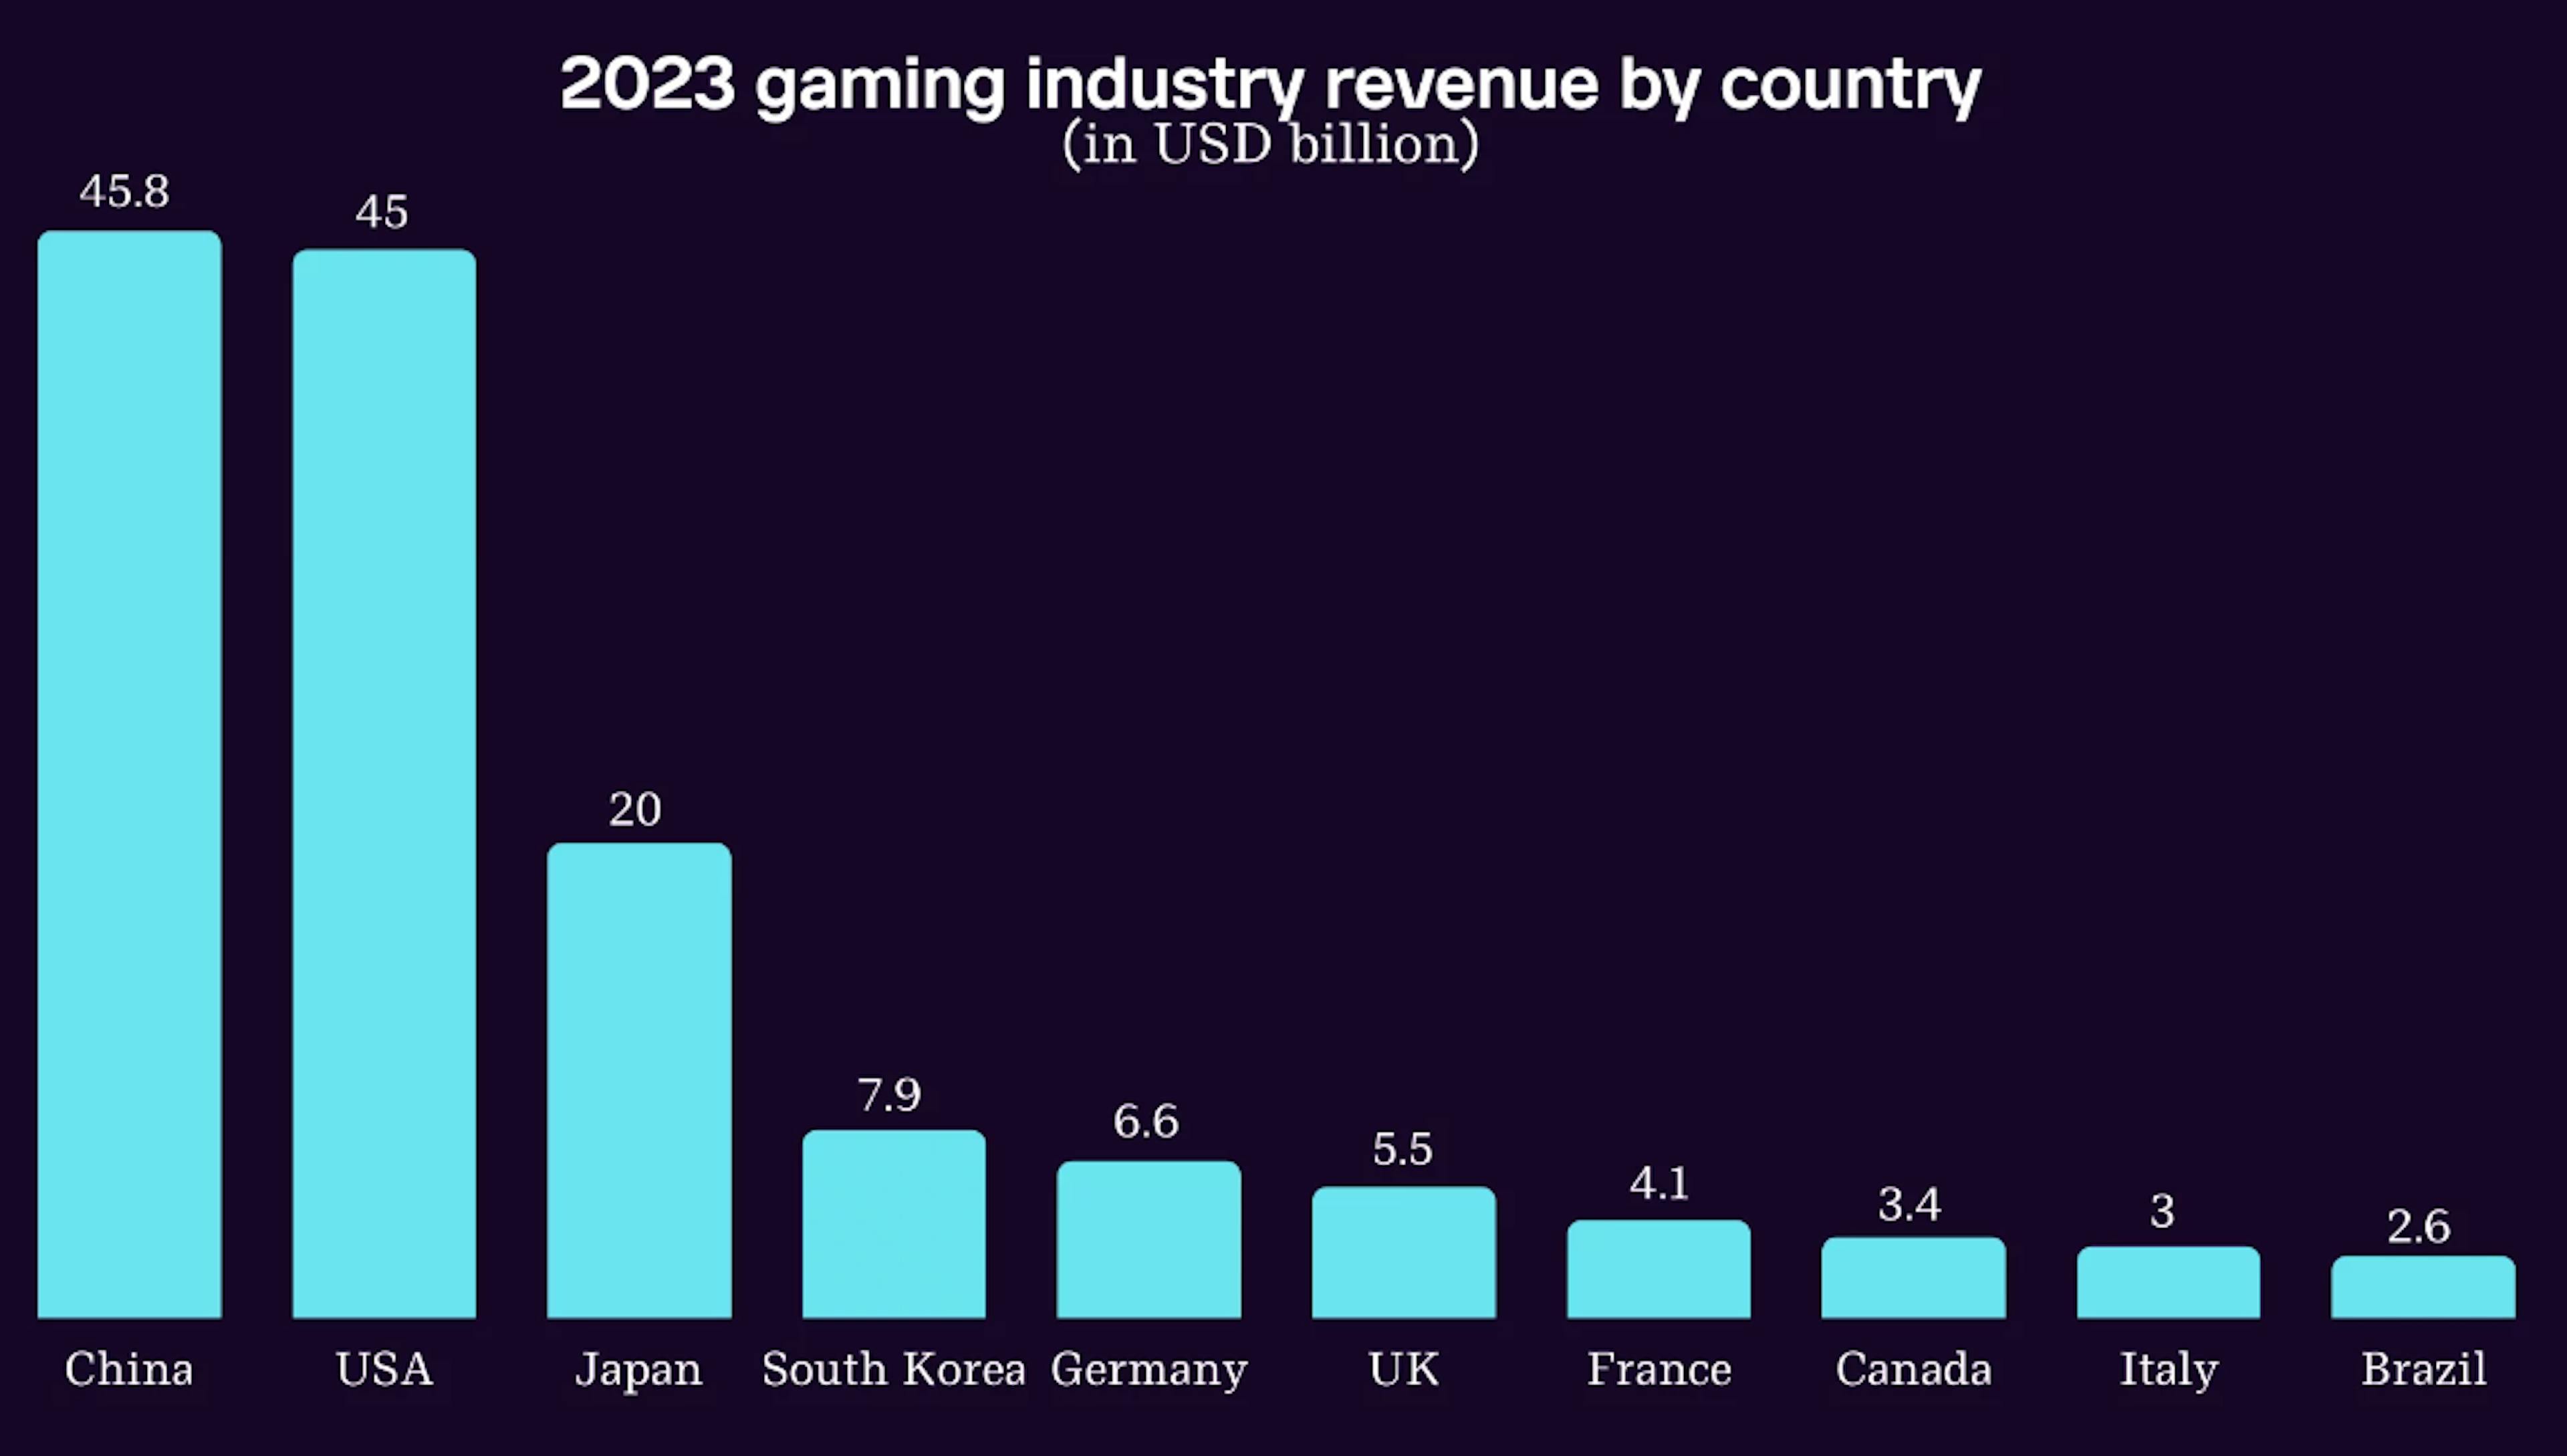 2023 gaming industry revenue by country